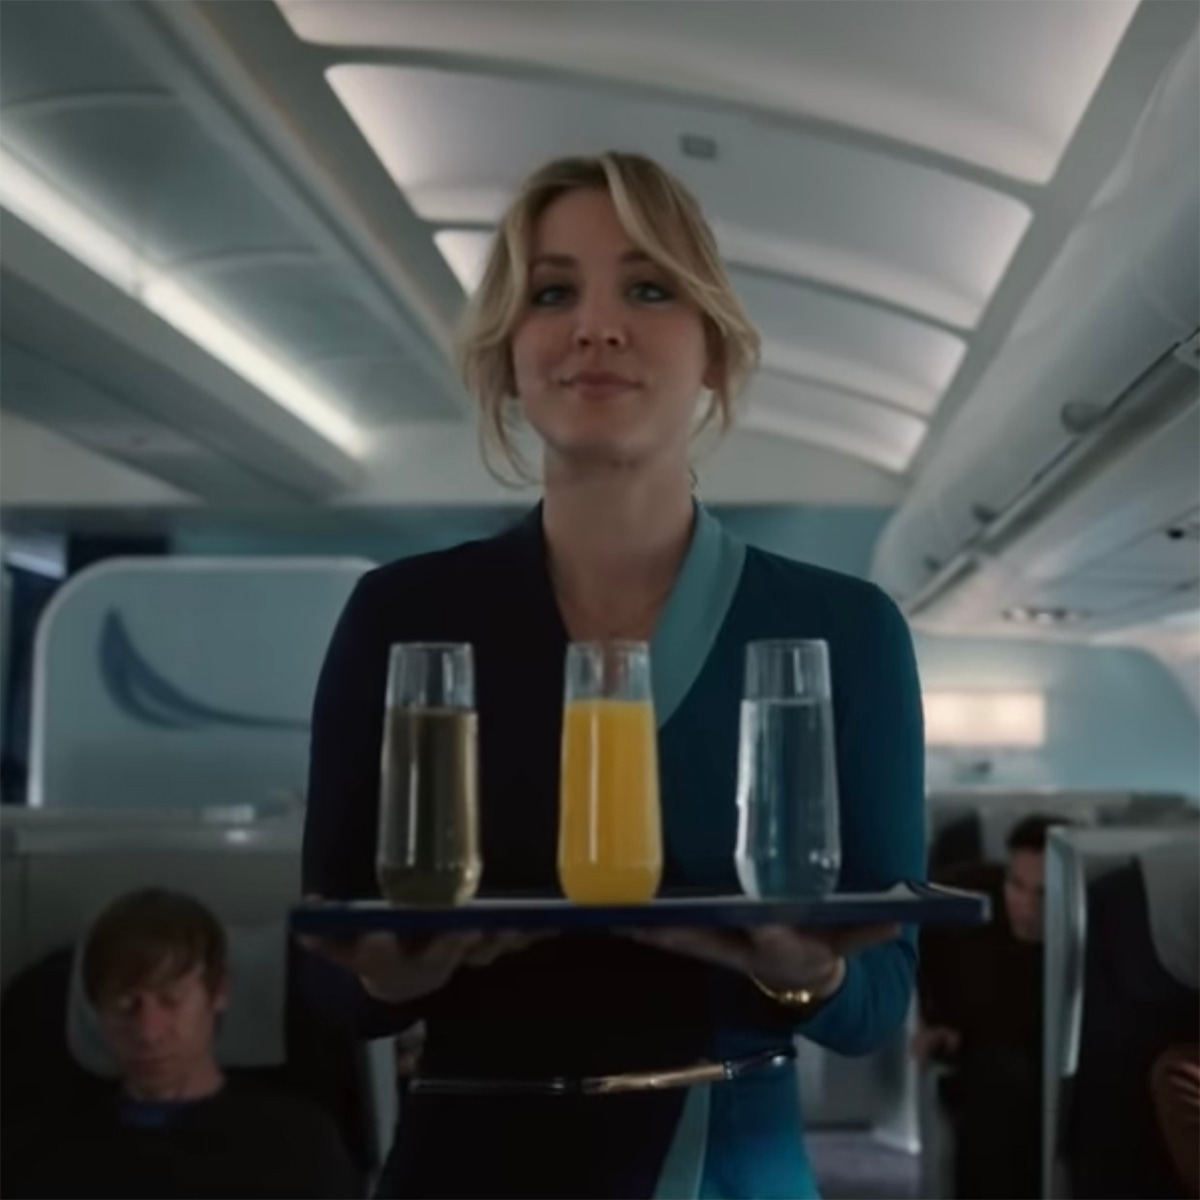 Kaley Cuoco S In Big Trouble In The Flight Attendant Trailer E Online Deutschland Afraid to call the police, she continues her morning as if nothing happened. flight attendant trailer